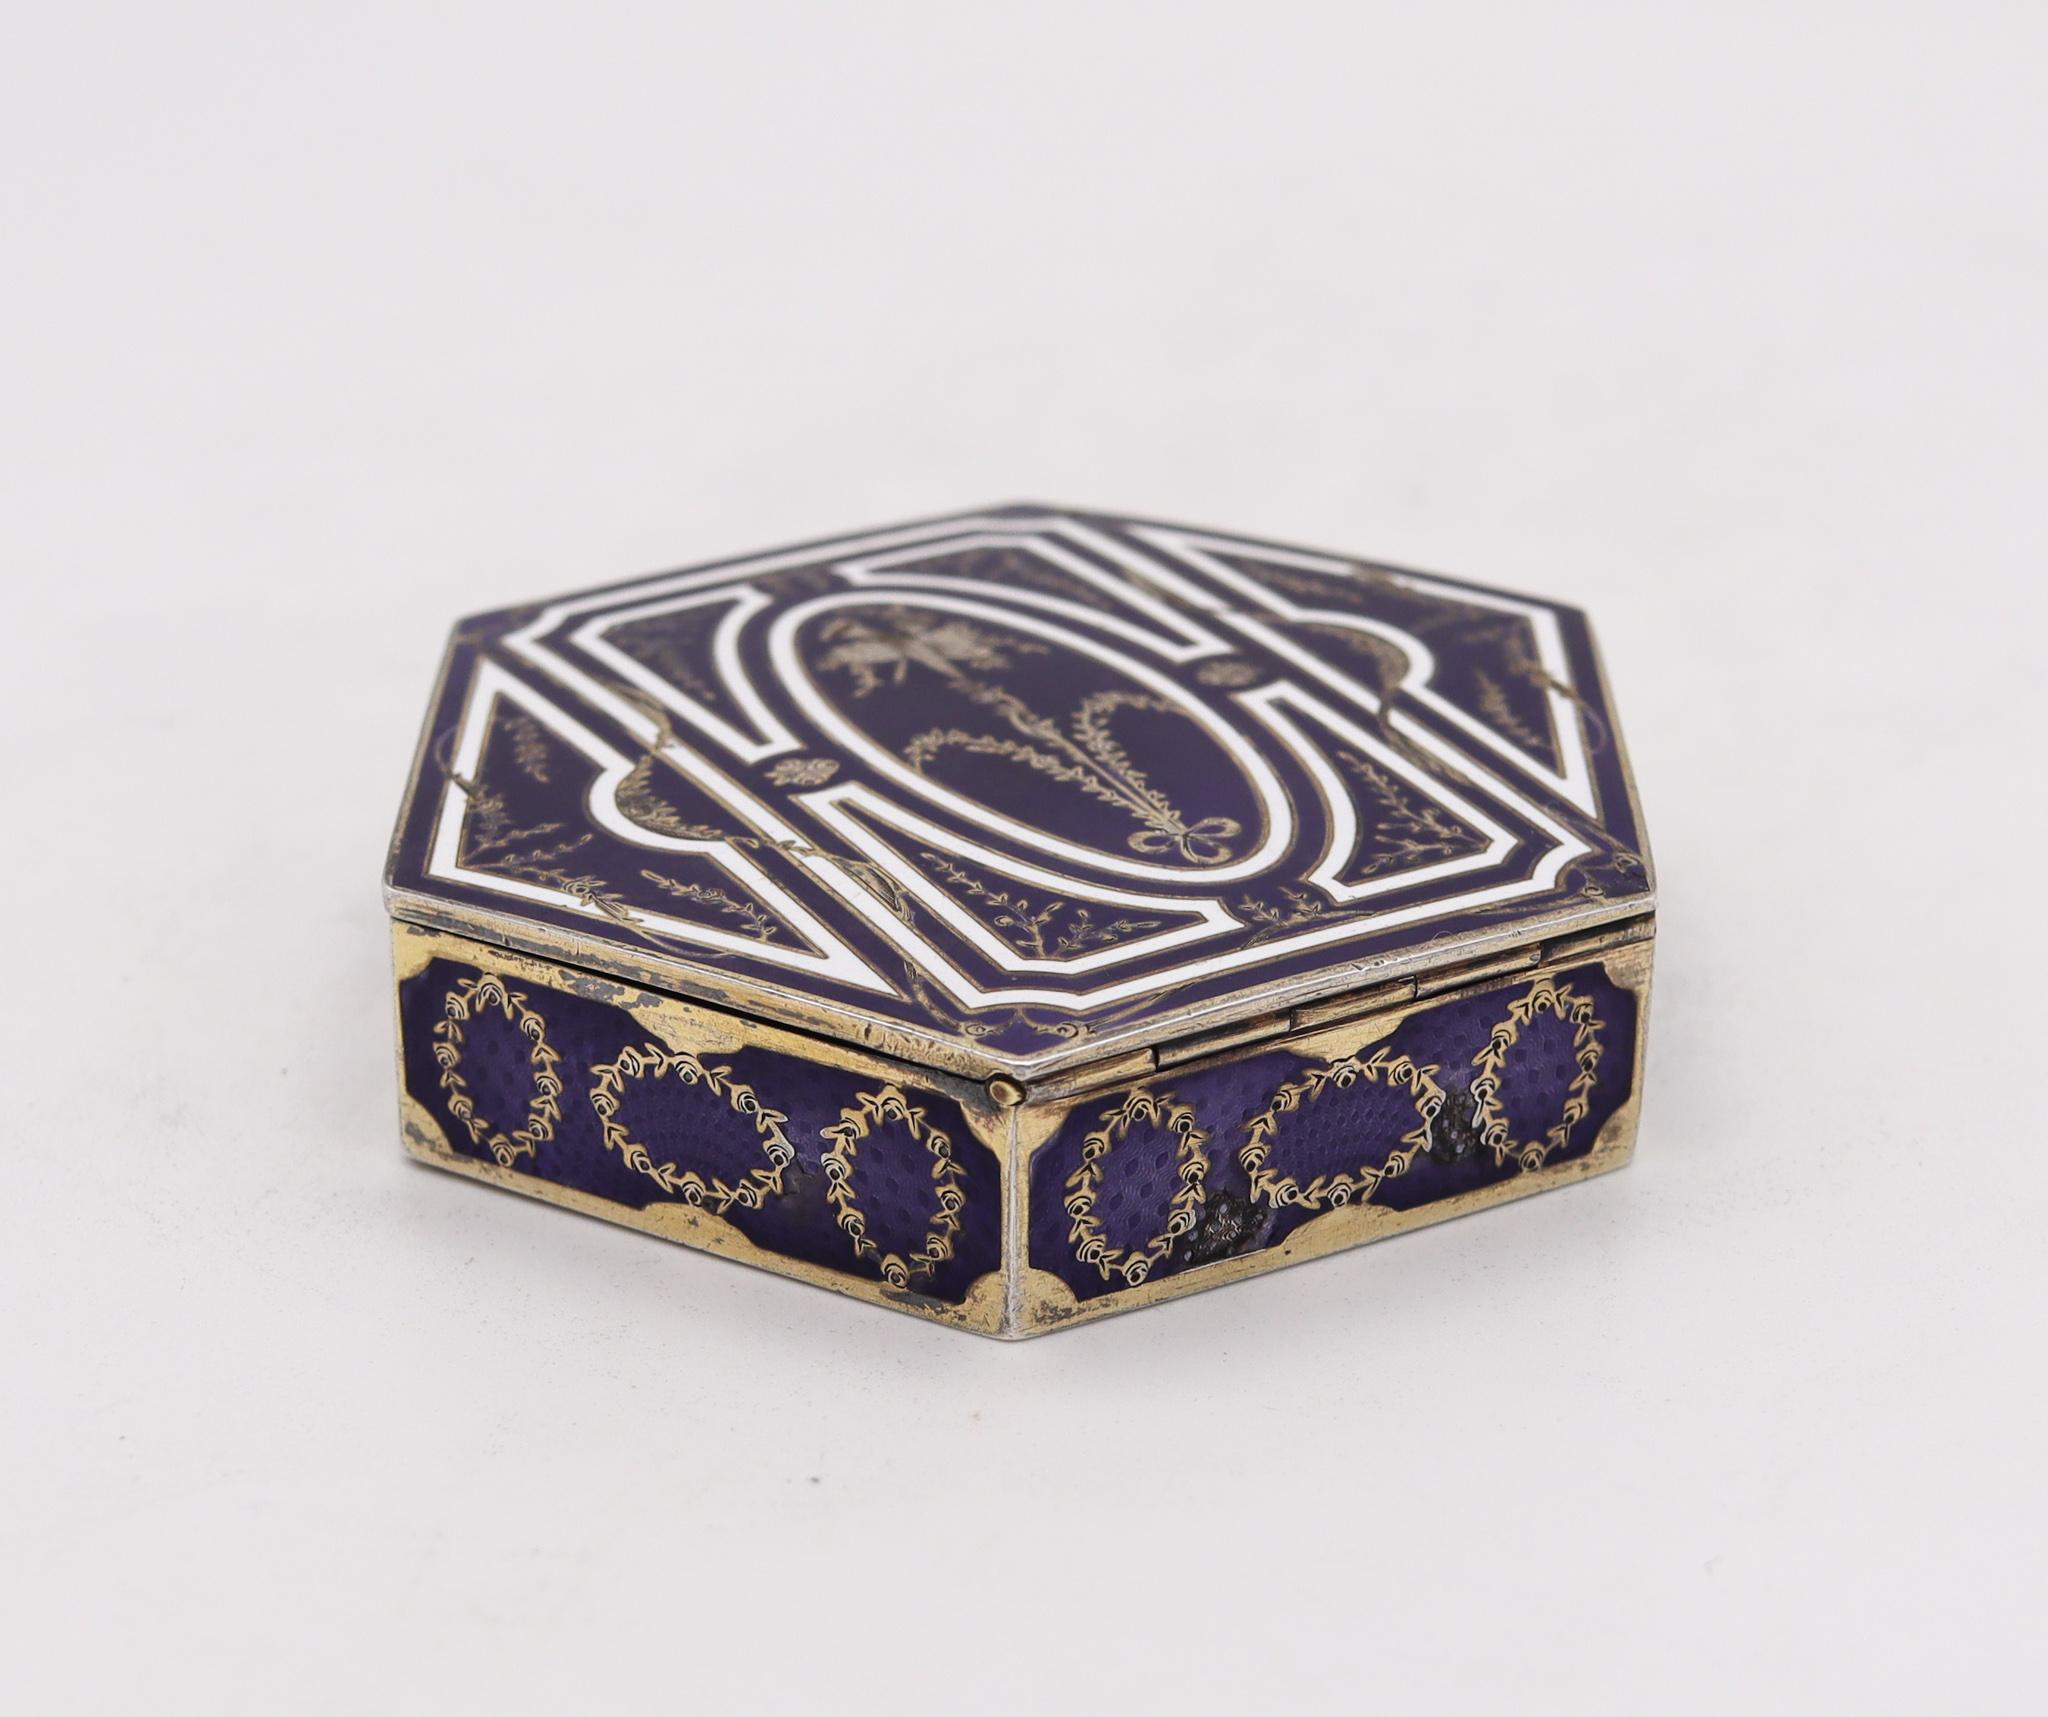 French 1905 Edwardian Hexagonal Snuff Box Sterling Silver with Guilloche Enamel For Sale 3